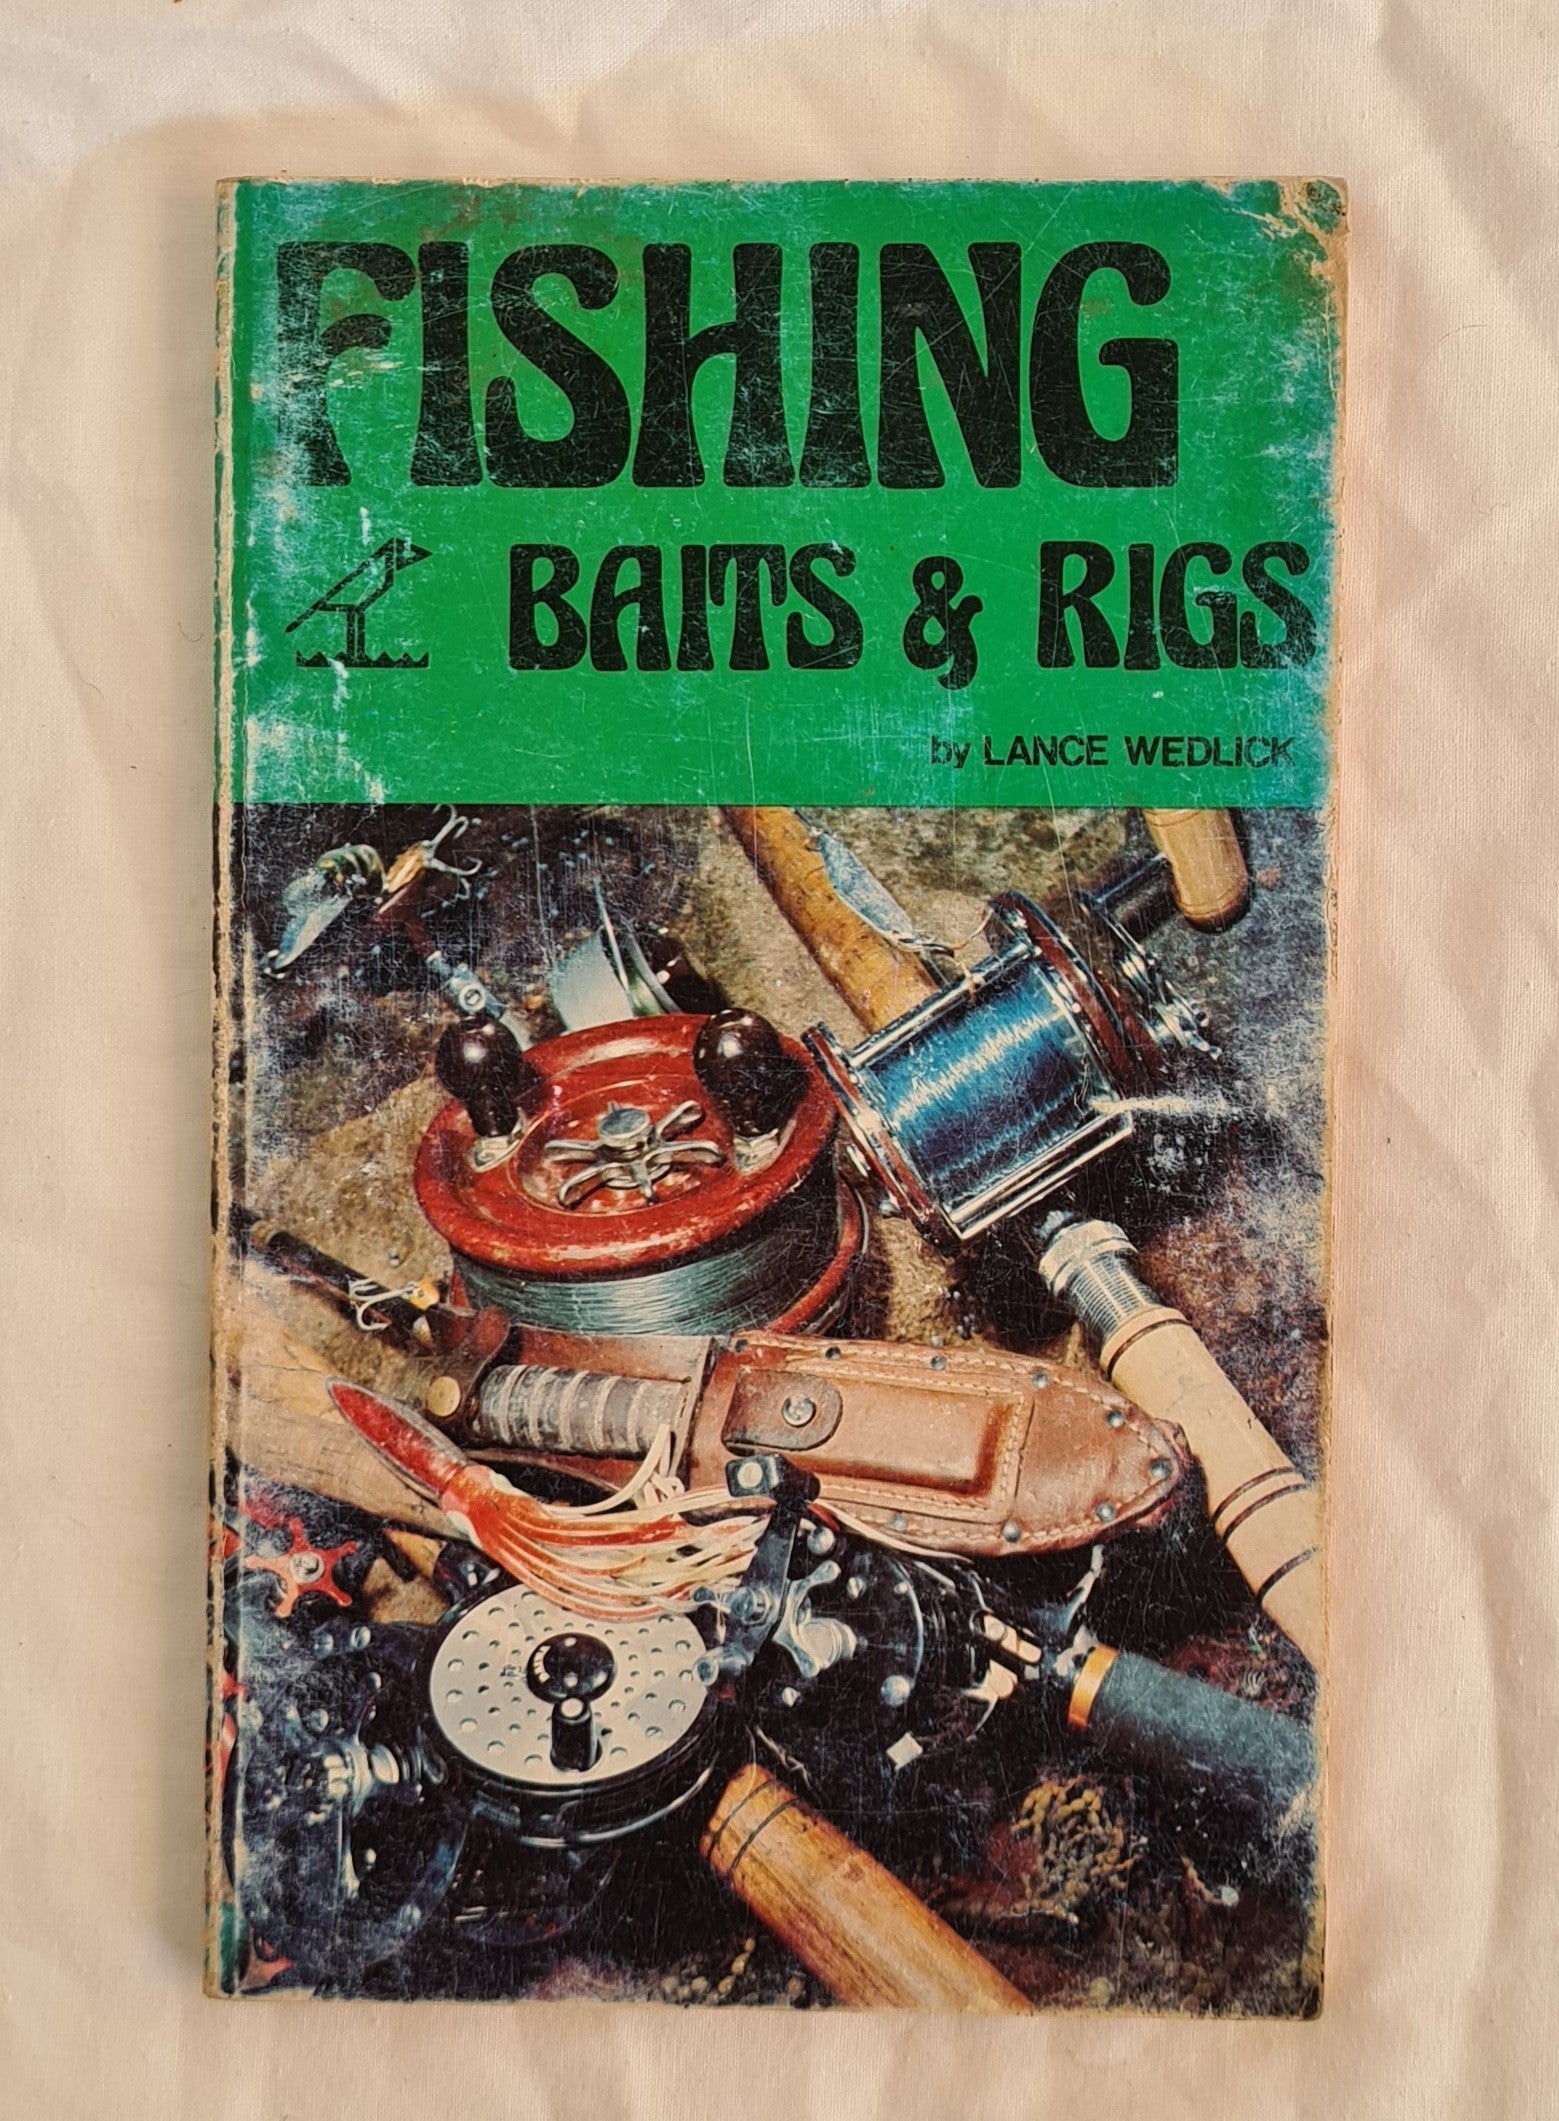 Top Fishing Baits & Rigs by Lance Wedlick